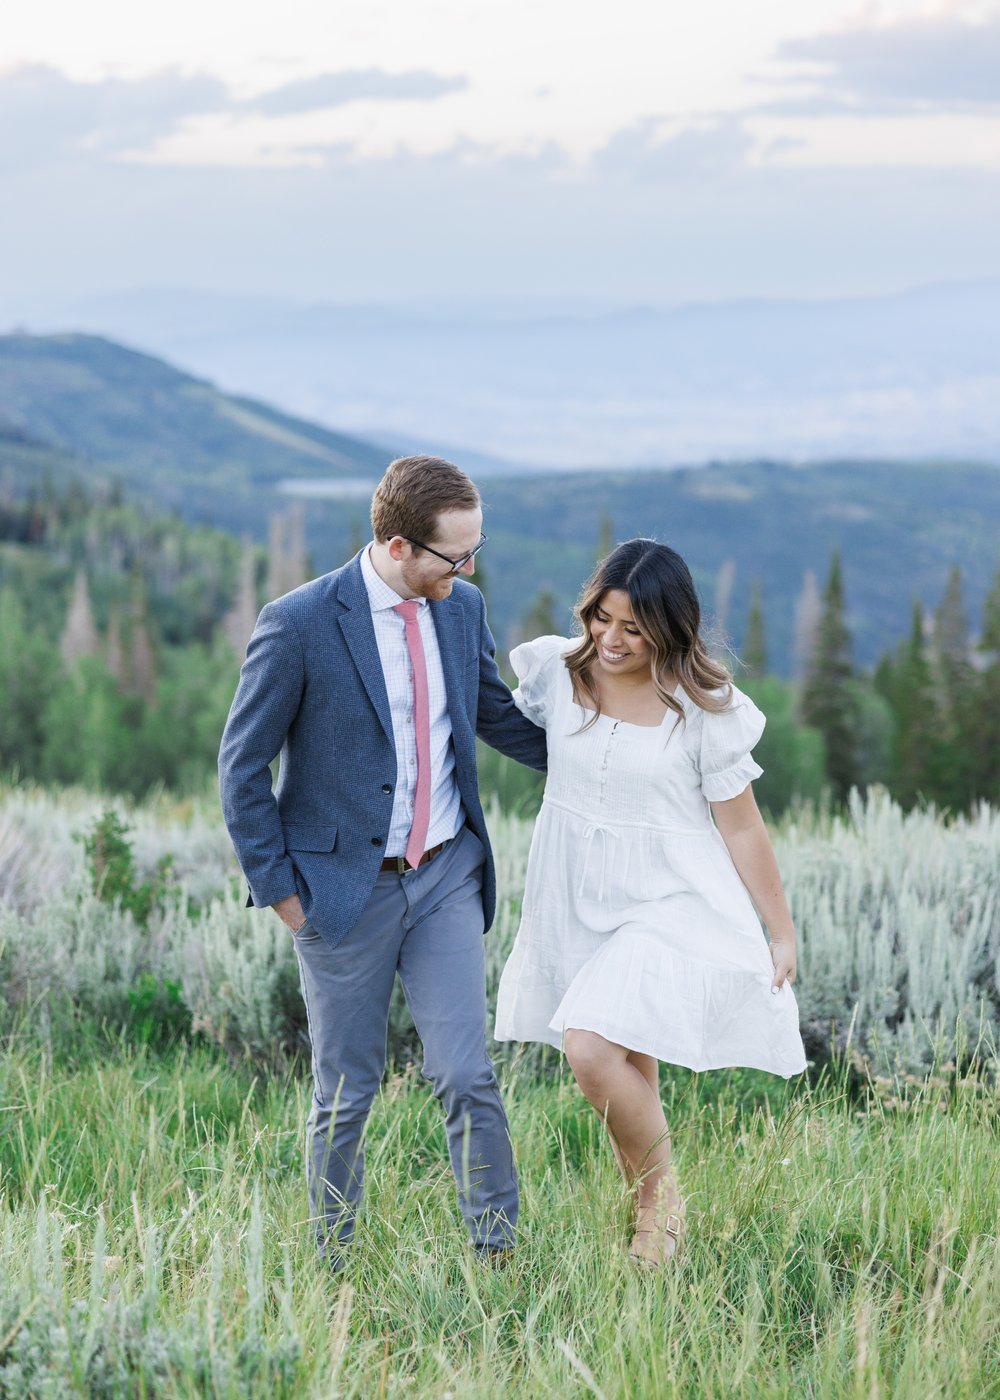  High-end Park City photographer Savanna Richardson Photography captures a woman in a white dress walking on a mountain with her fiance. Mountain #ParkCityEngagements #ParkCityPhotographers #SavannaRichardsonPhotography #SavannaRichardsonEngagements 